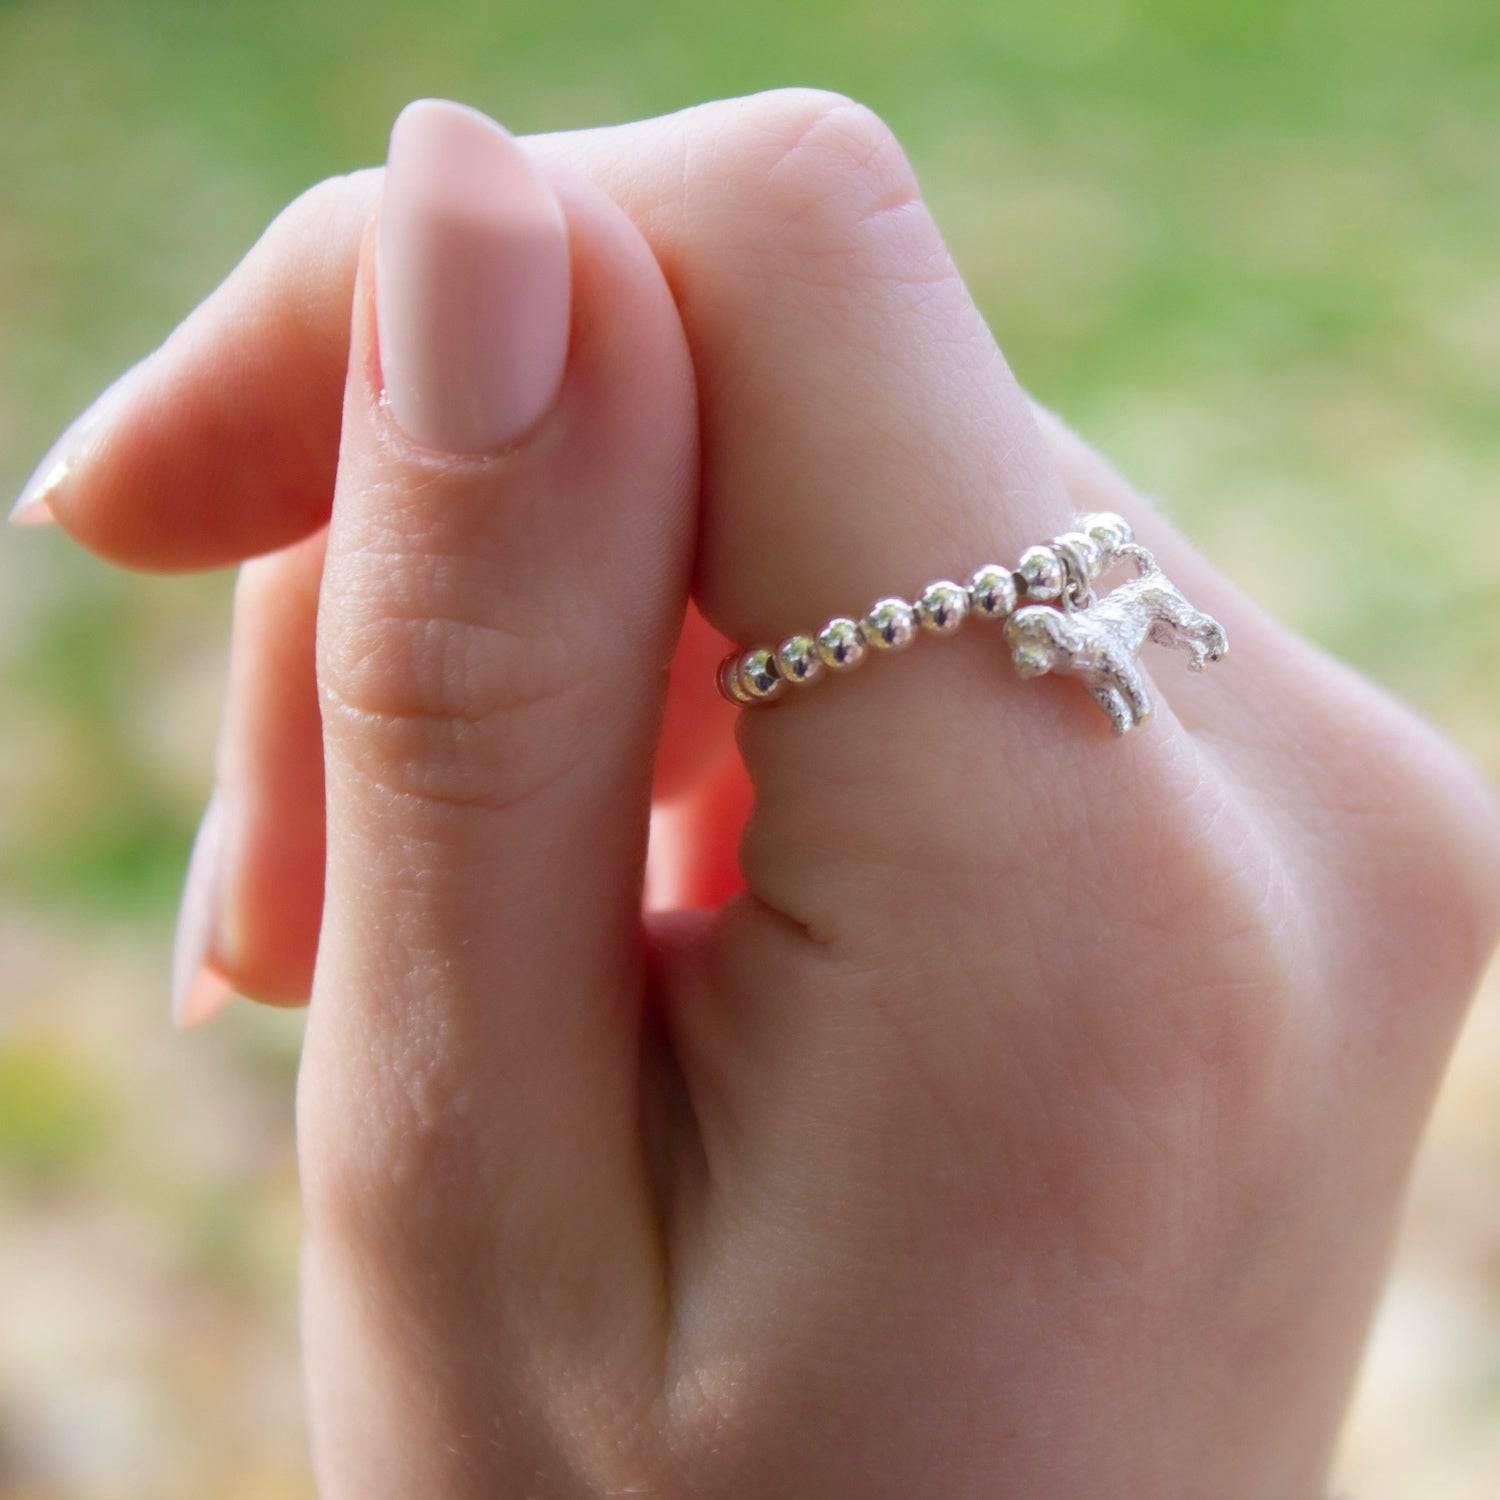 Sterling Silver Ball Bead Ring With Mini Cockapoo Charm - MYLEE London